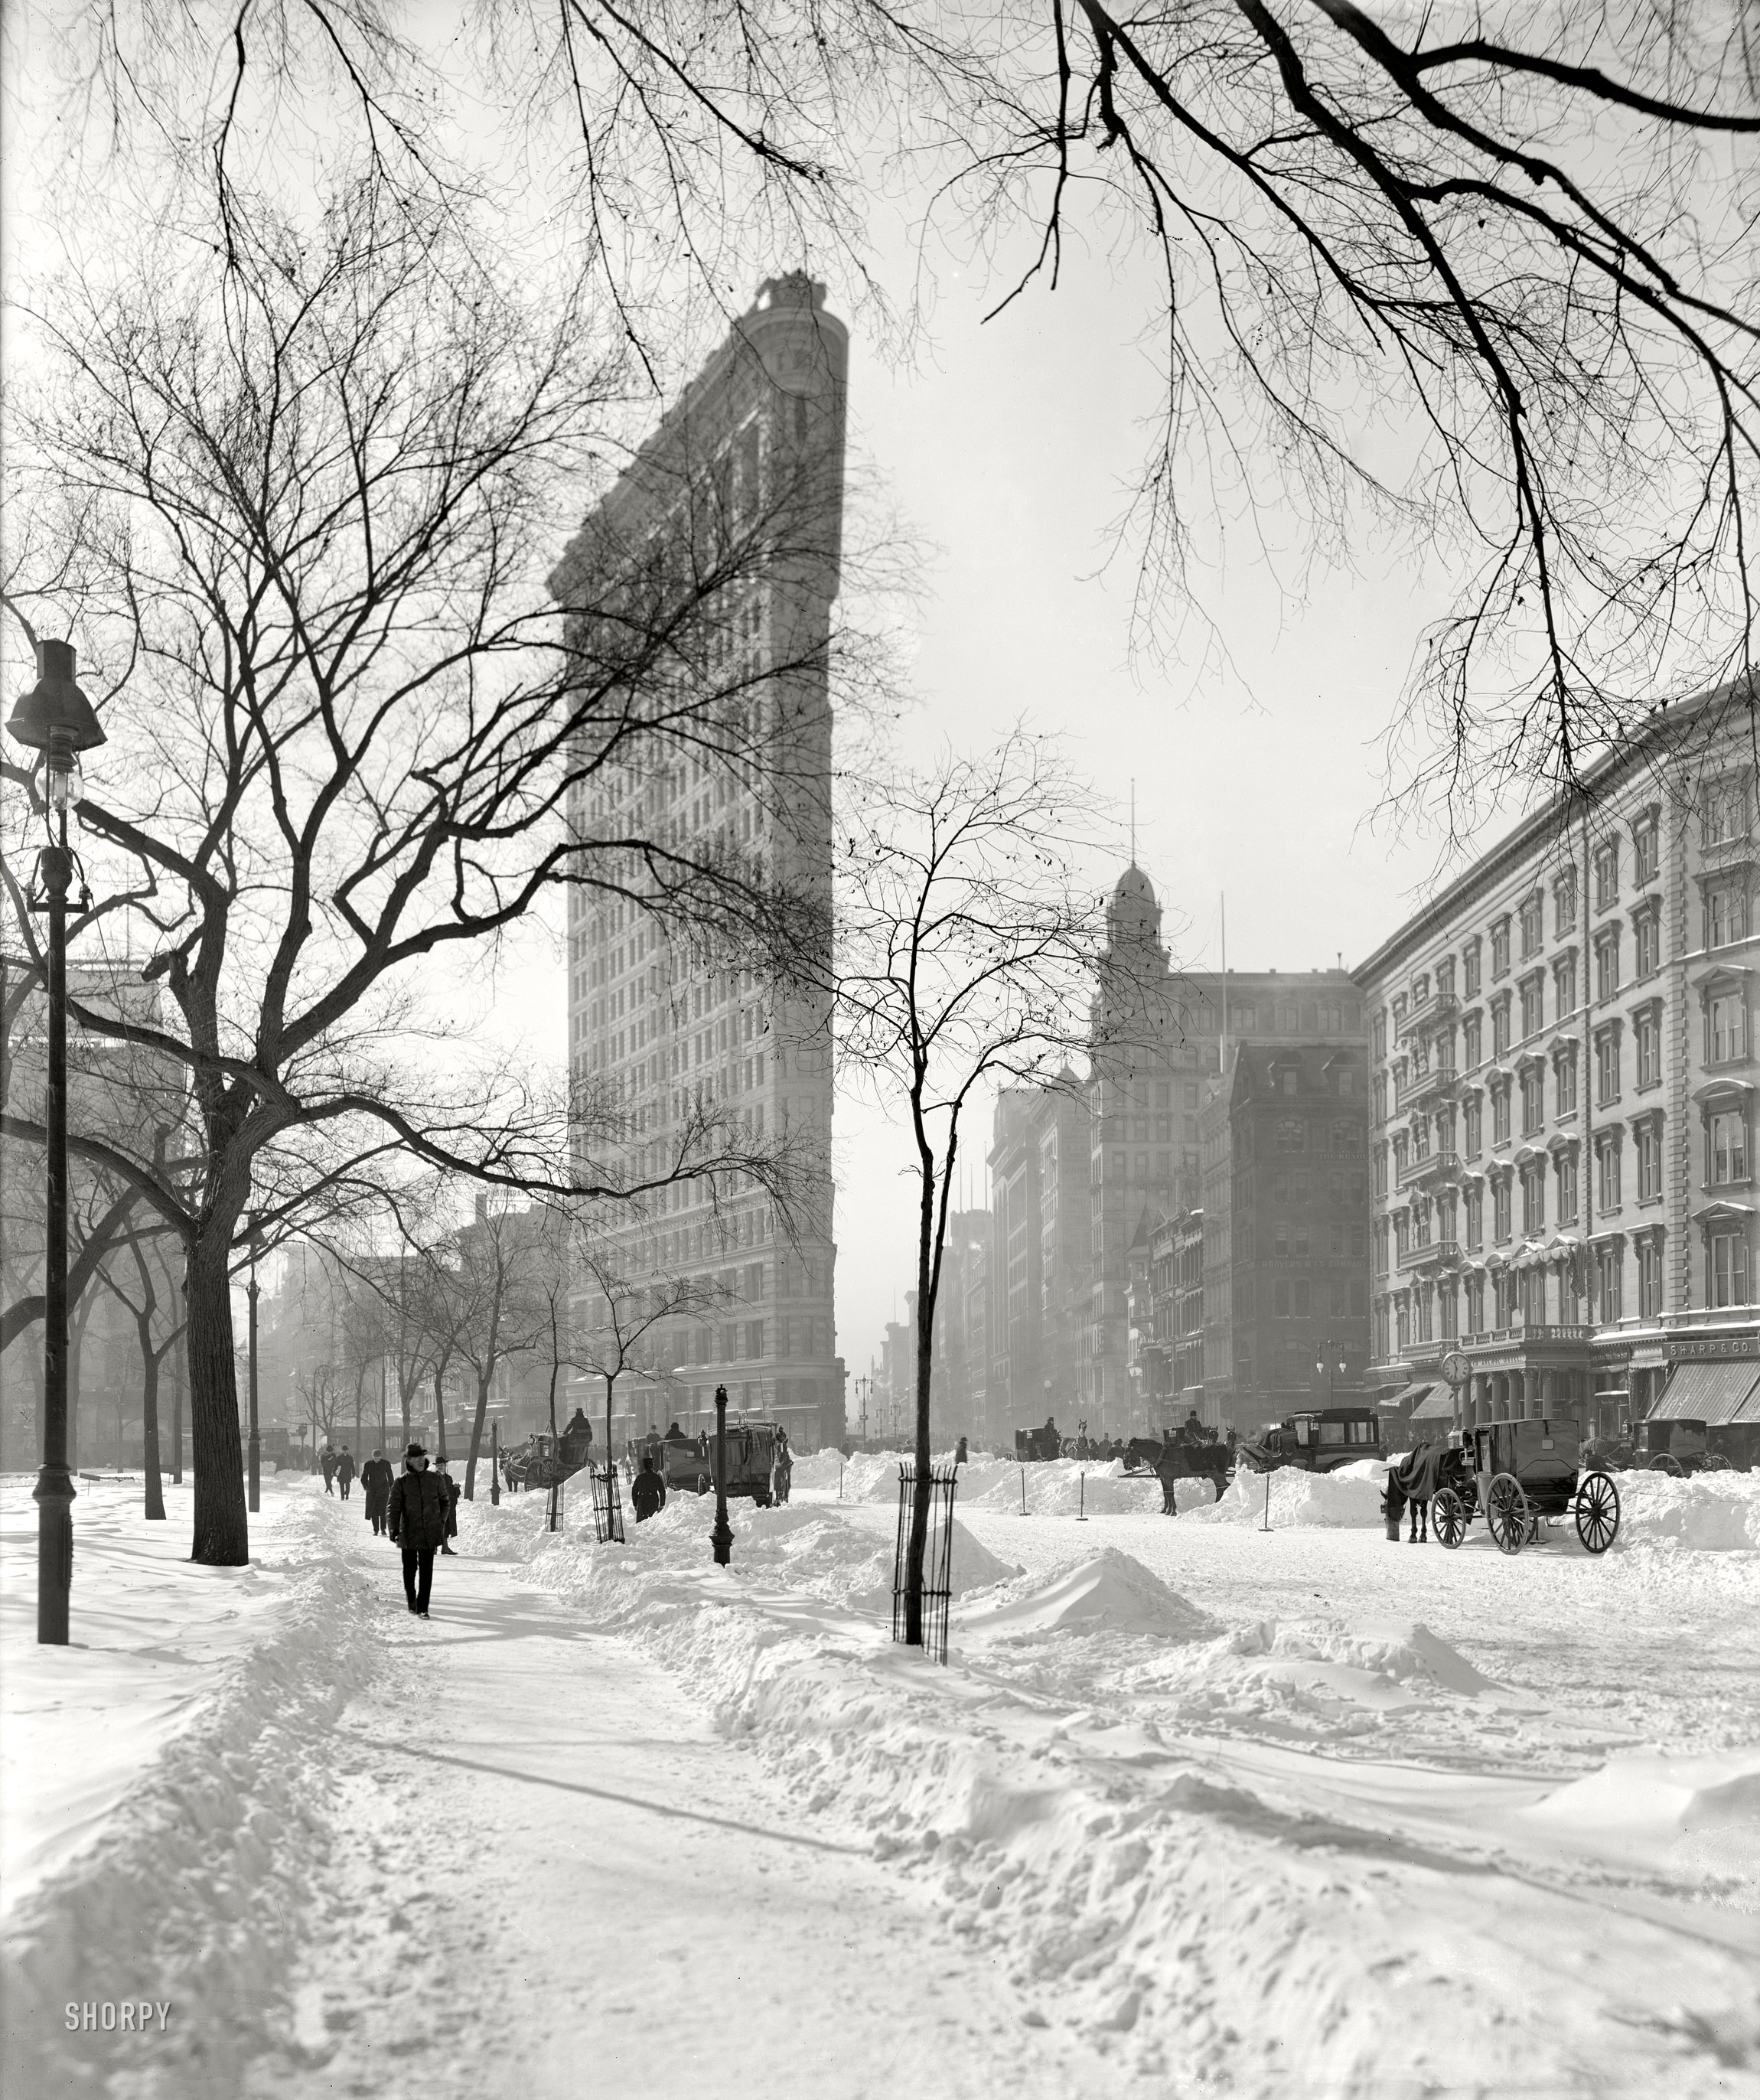 New York circa 1905. "Flat-iron corner after snowstorm." 8x10 inch dry plate glass negative, Detroit Publishing Company. View full size.